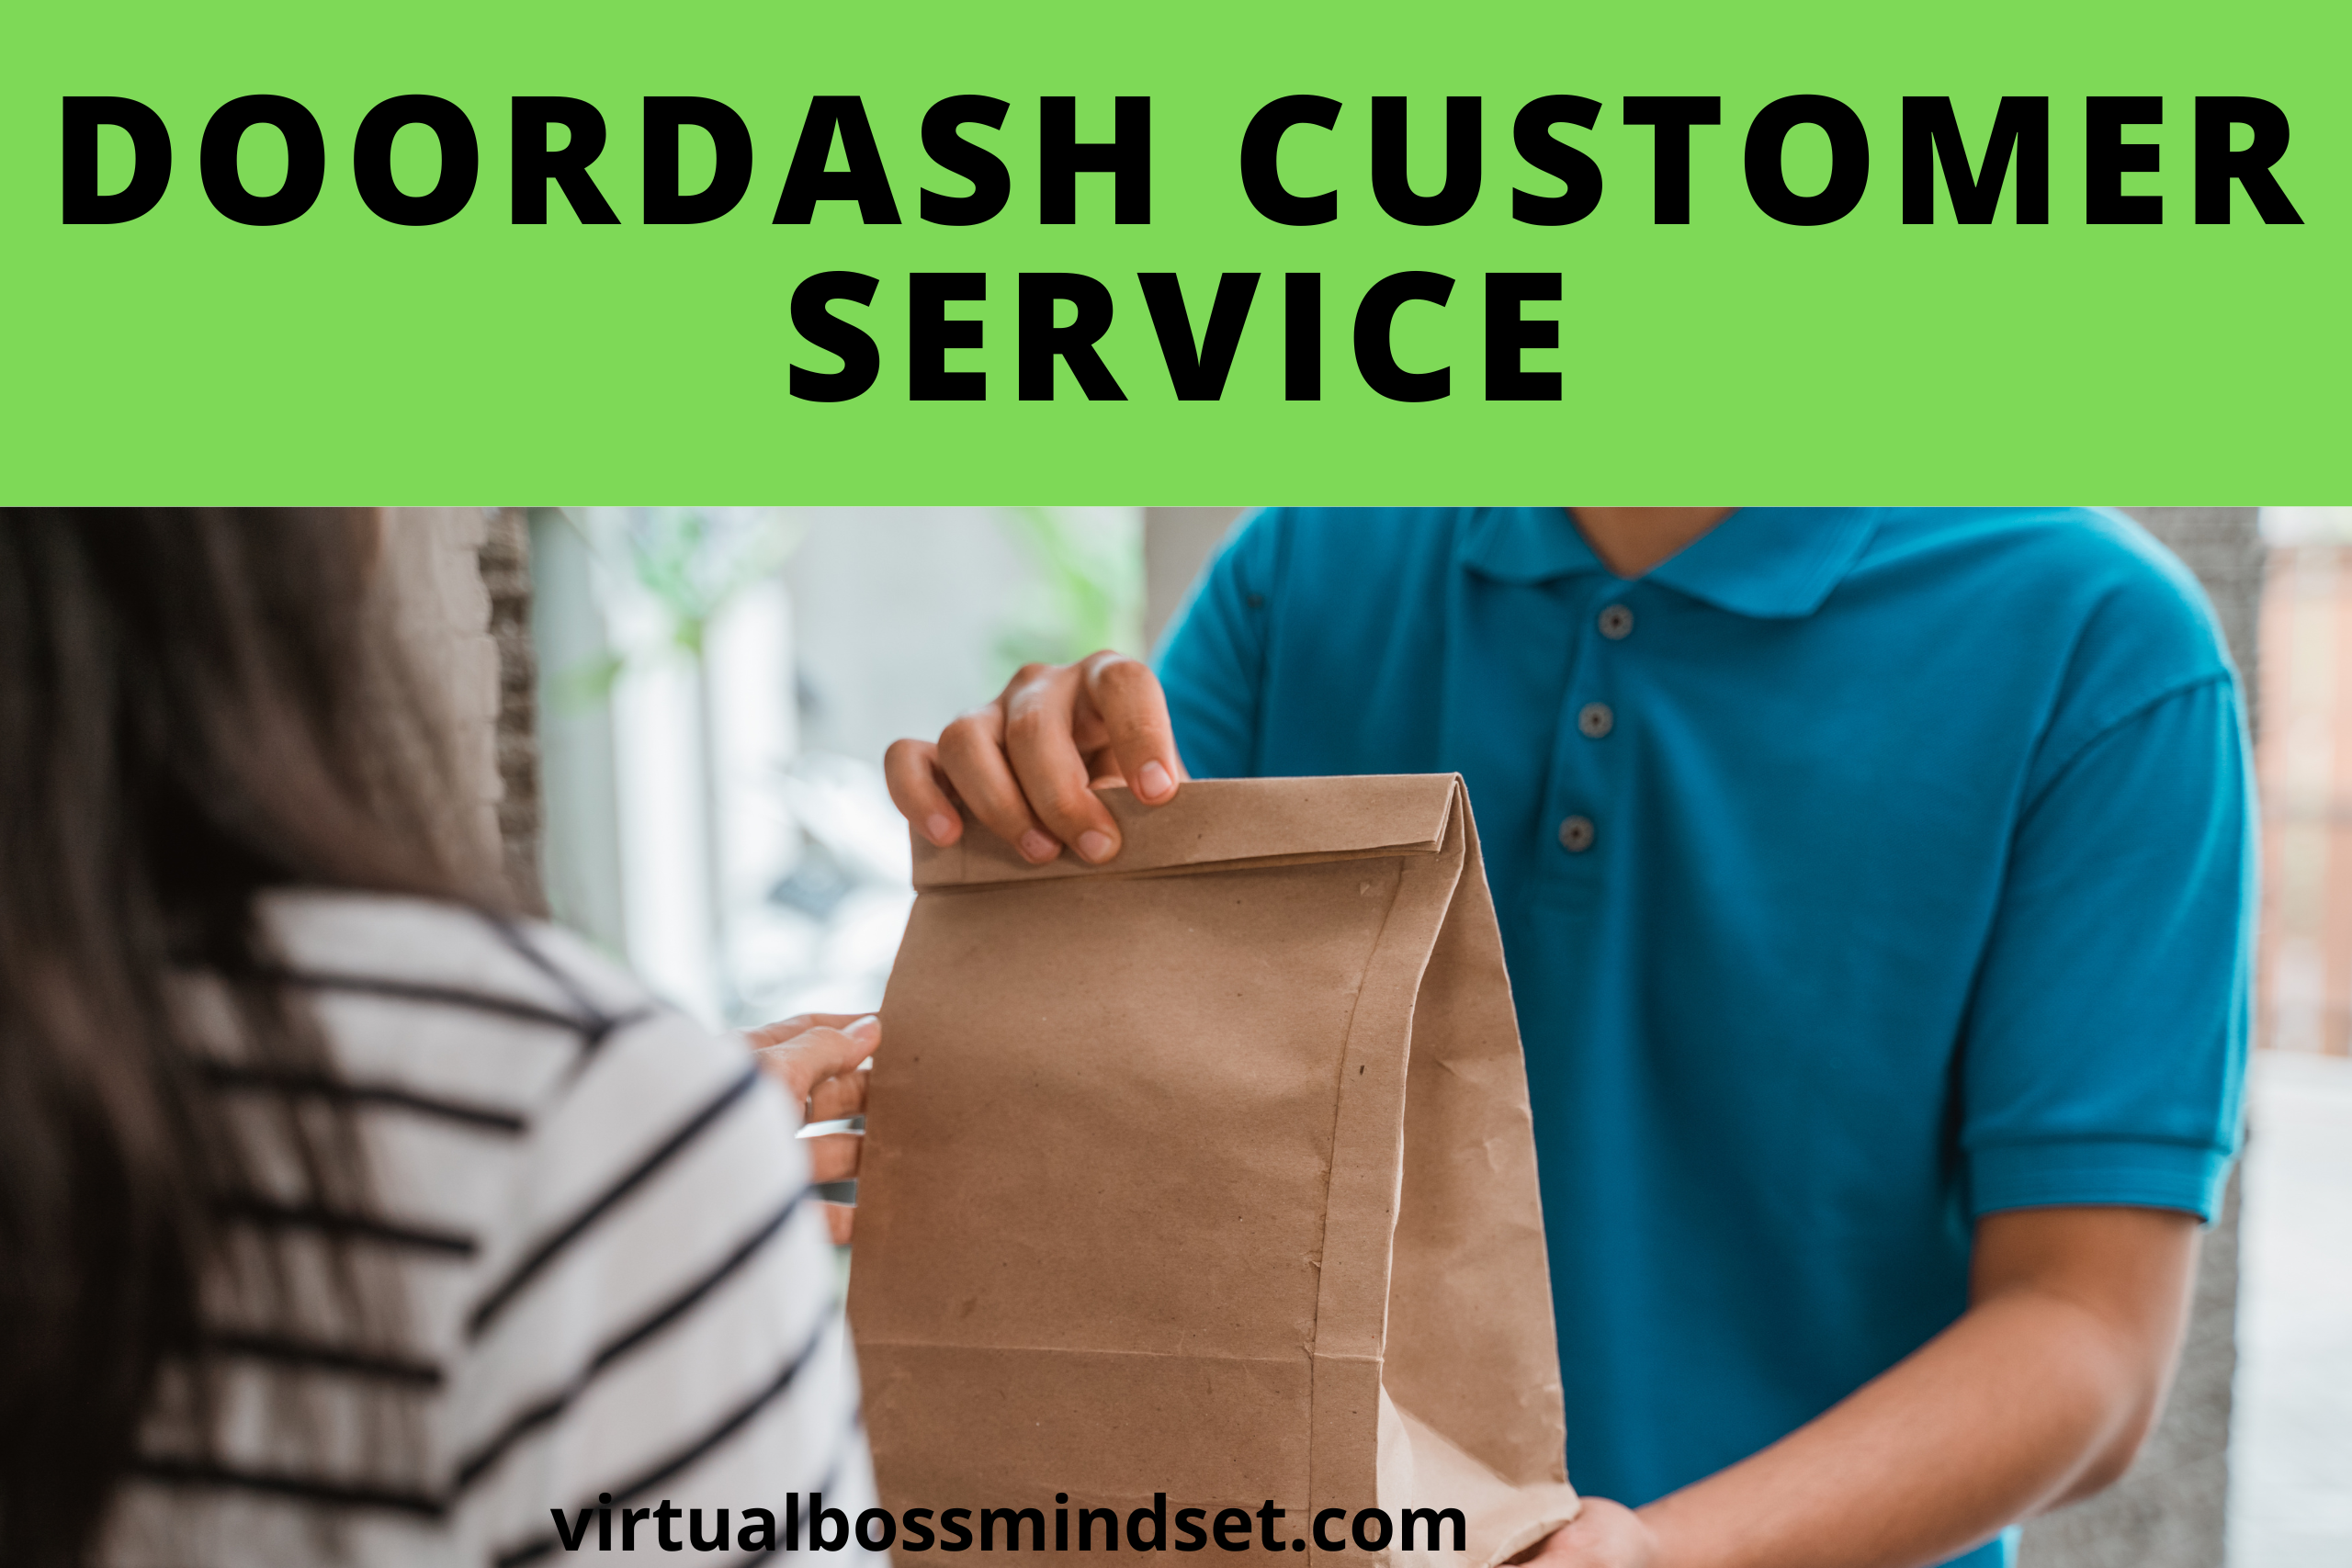 DoorDash Customer Service Numbers for Customers, Drivers, and Merchants